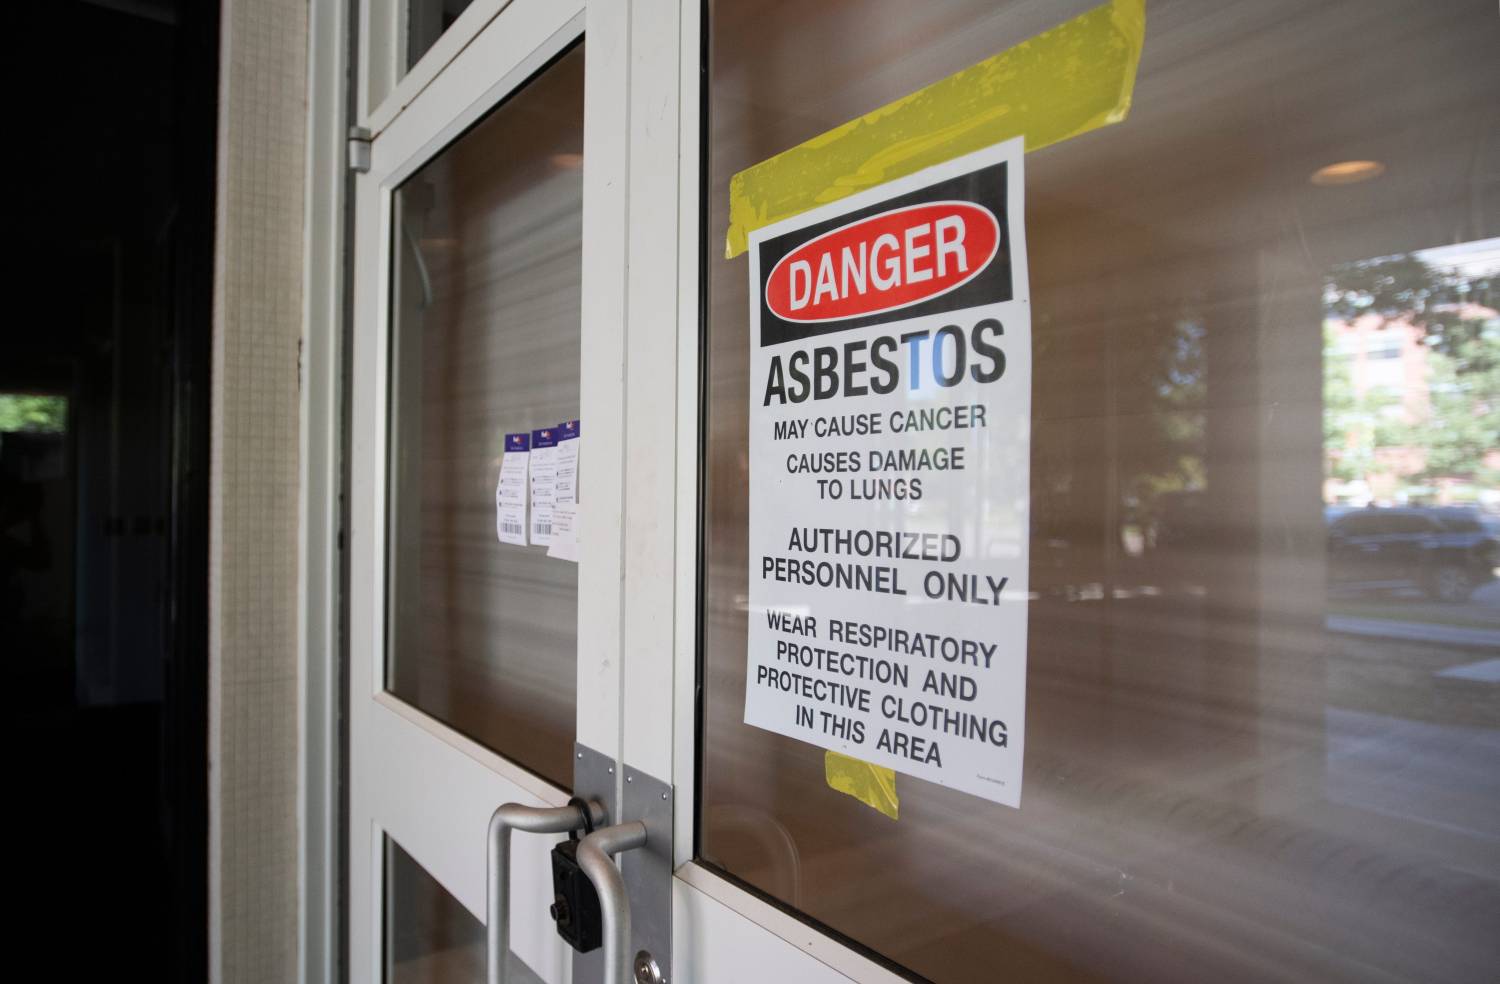 A sign warns of asbestos on the doorway to the office tower at 215 W. Oak St. in Fort Collins, Colo. on Tuesday, Sept. 1, 2020.090120 Asbestos 01 Bb